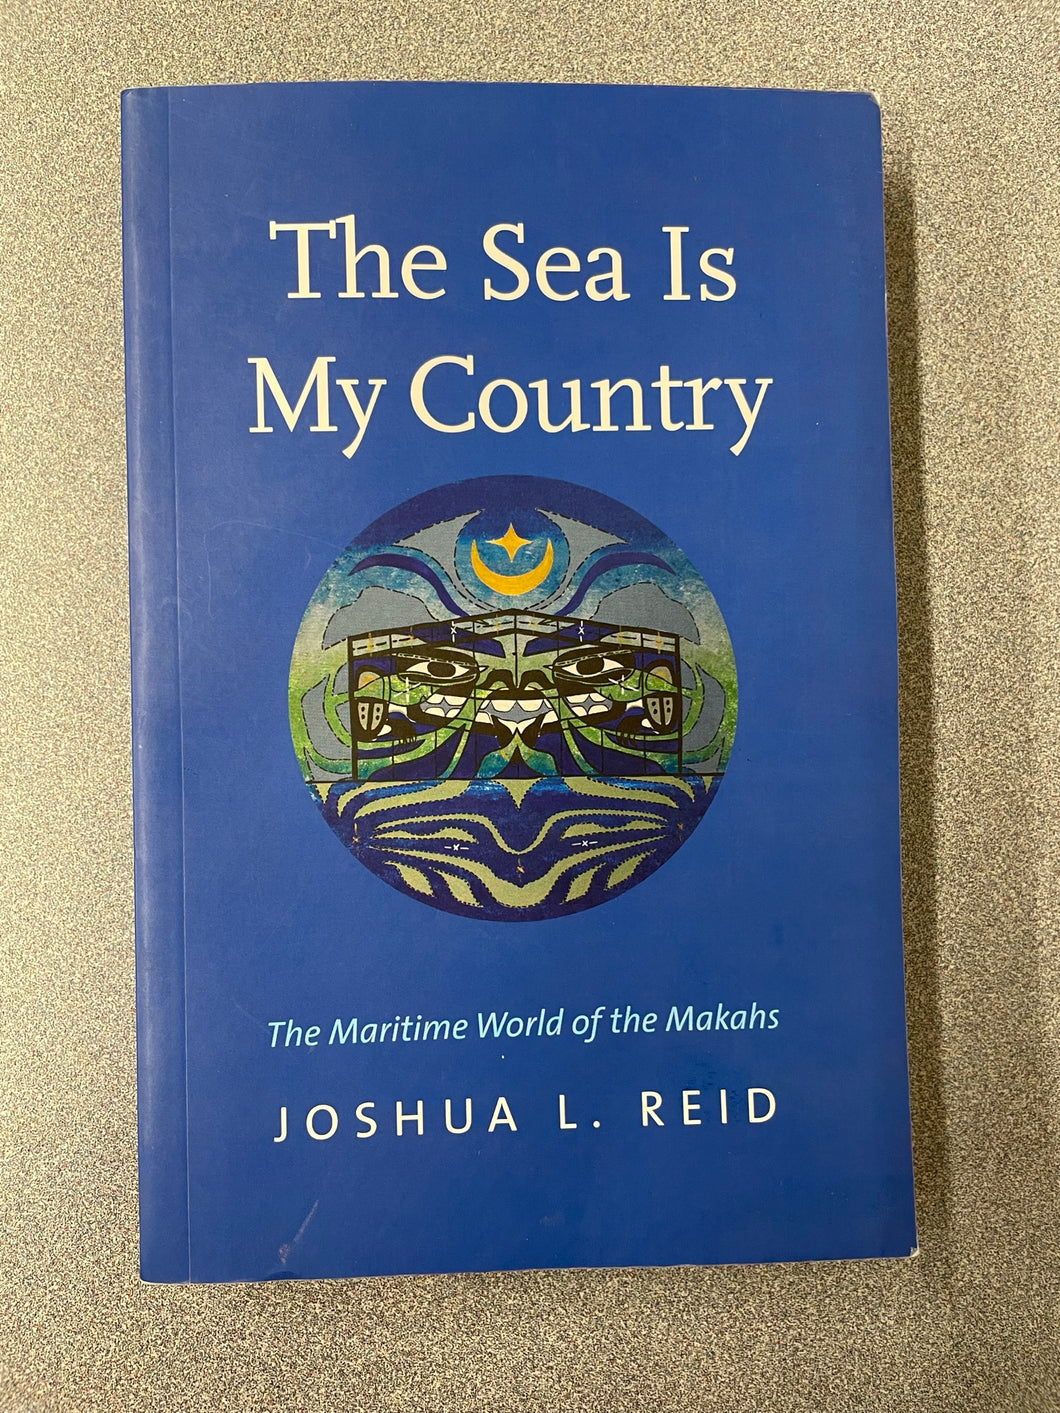 The Sea Is My Country: The Maritime World of the Makahs, Reid, Joshua L. [2015} H 3/23